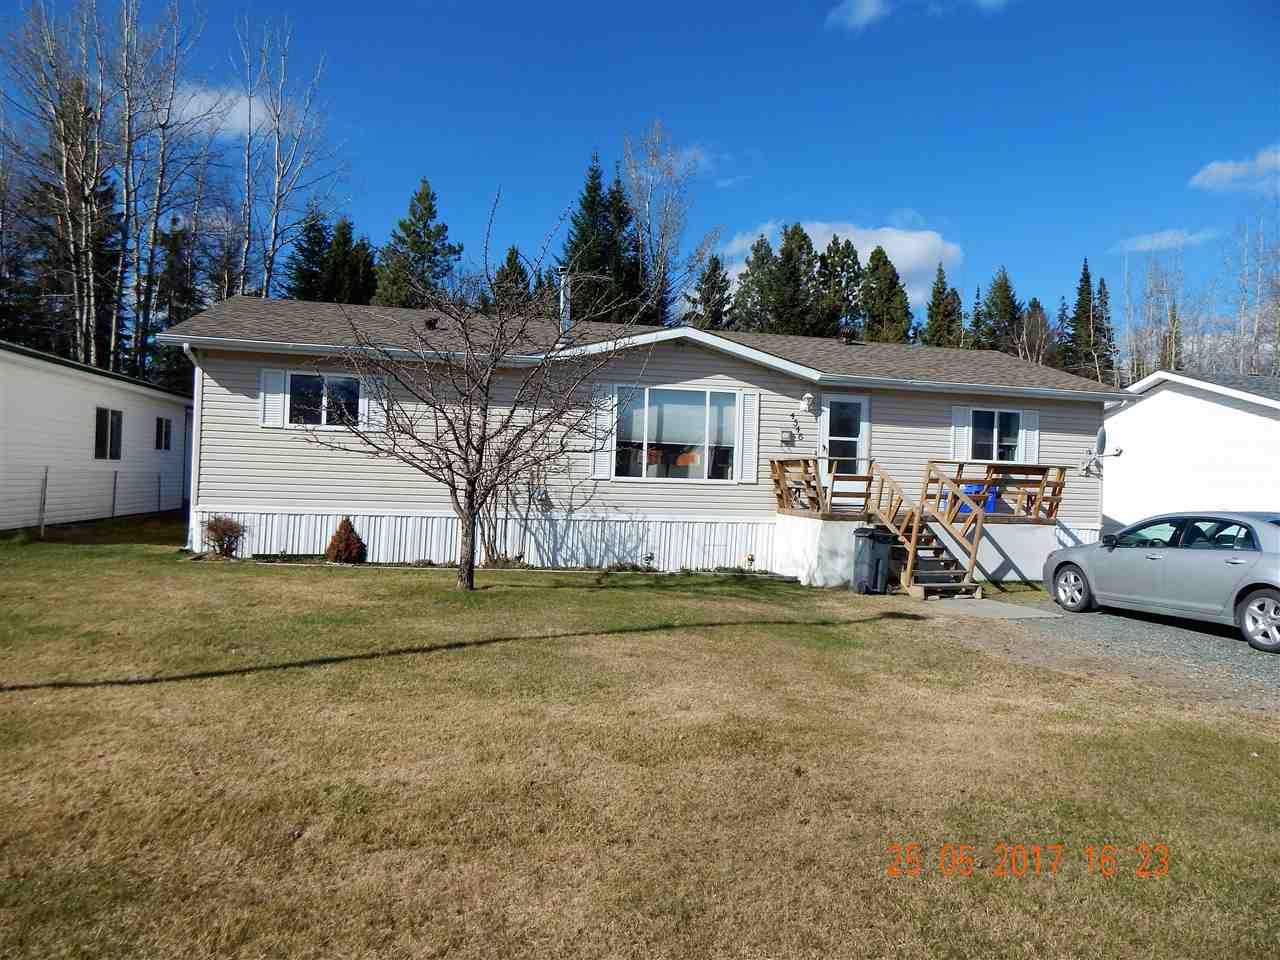 Main Photo: 4546 GRAY Drive in Prince George: Hart Highlands Manufactured Home for sale (PG City North (Zone 73))  : MLS®# R2159788